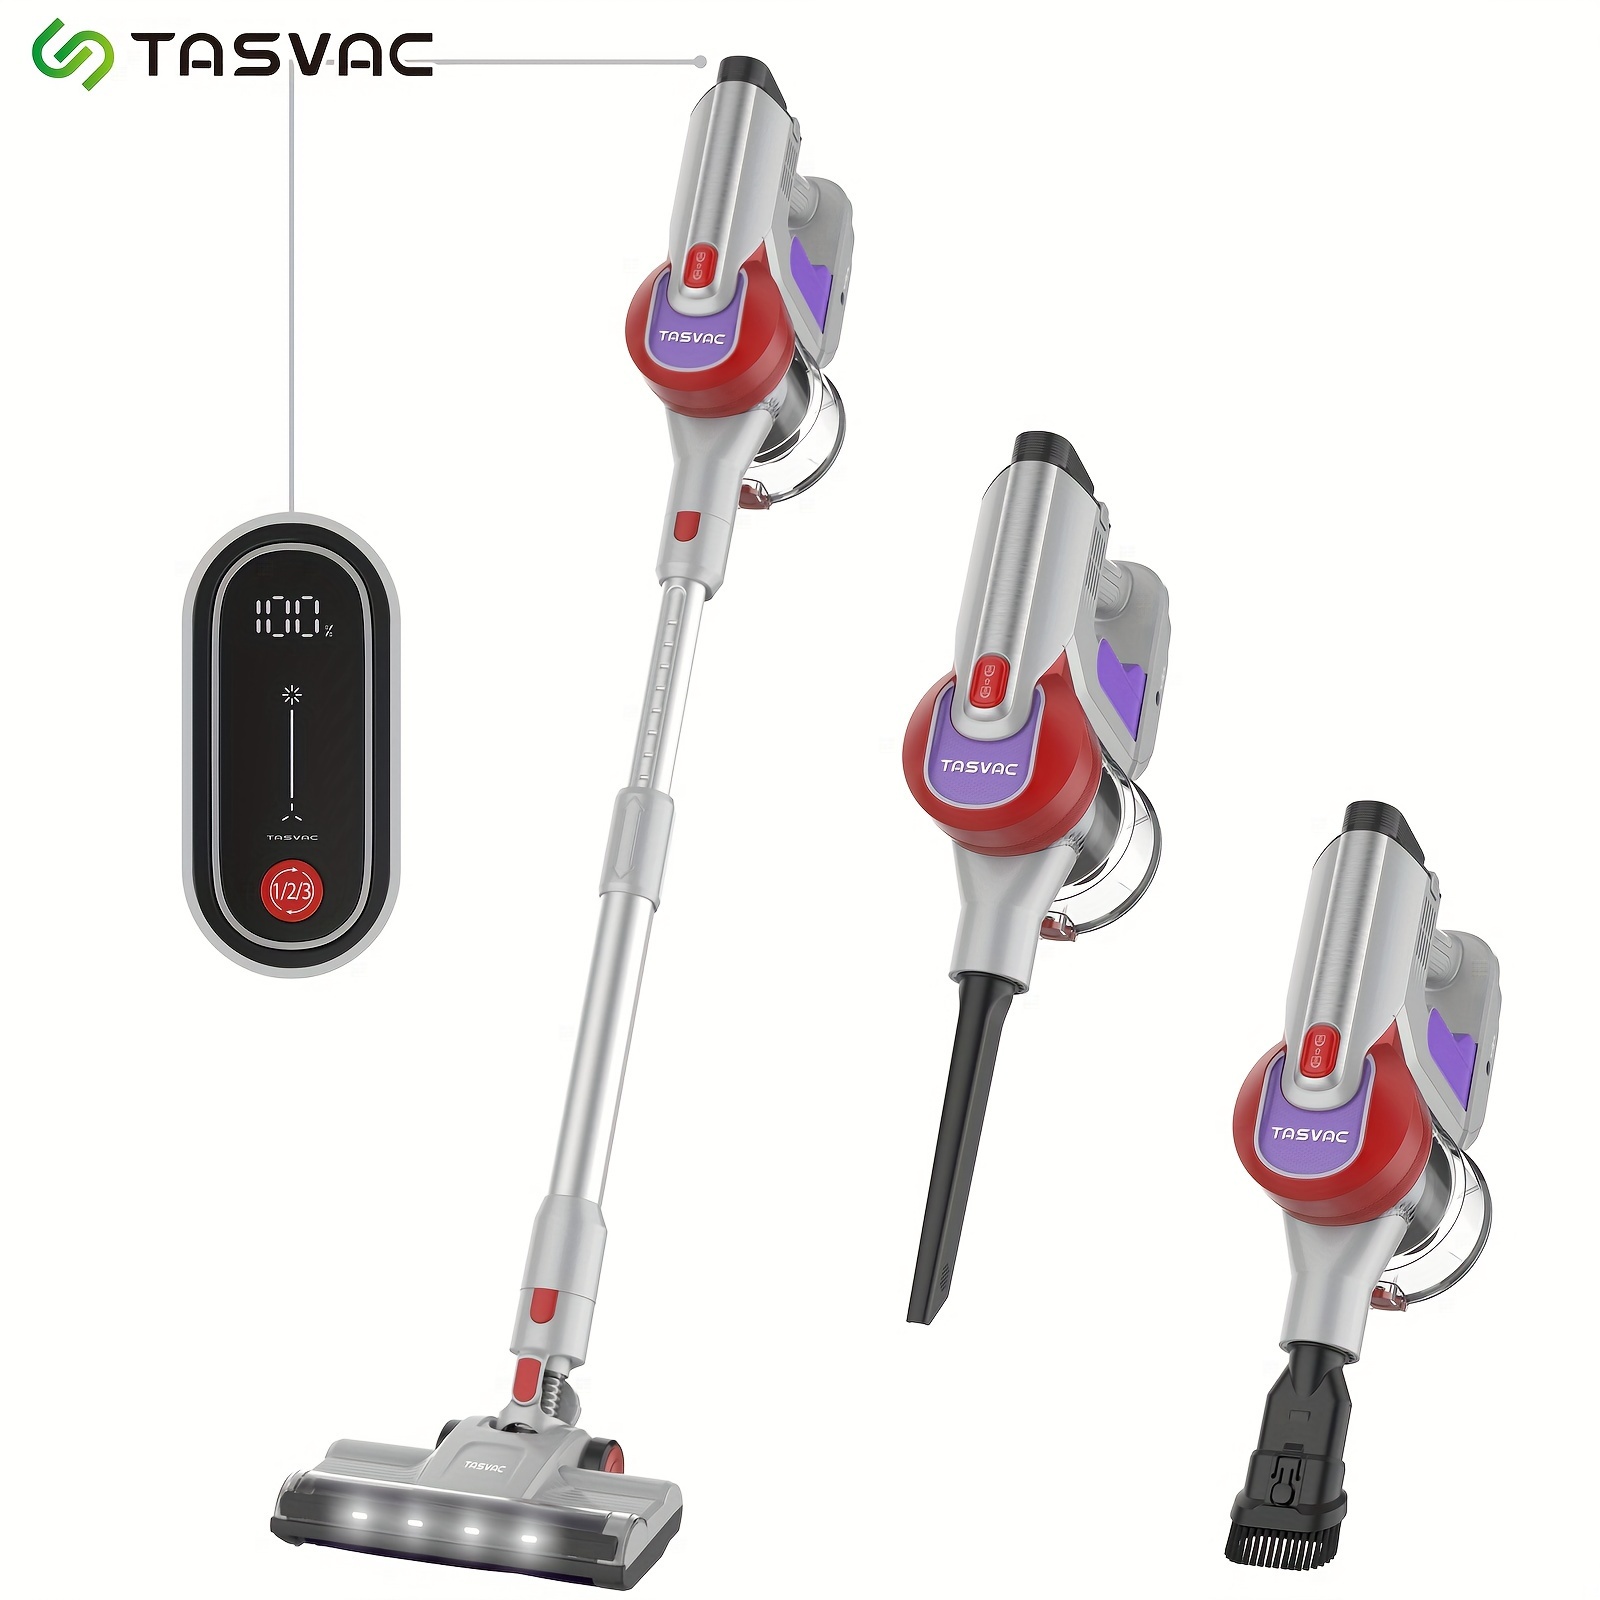 

Tasvac Cordless Vacuum Cleaner, 28kpa Stick Vacuum With Led Display, Up To 50min Runtime, 6-in-1 Lightweight Powerful Vacuum With Detachable Battery Self-standing For Hard Floor Carpet Pet Hair